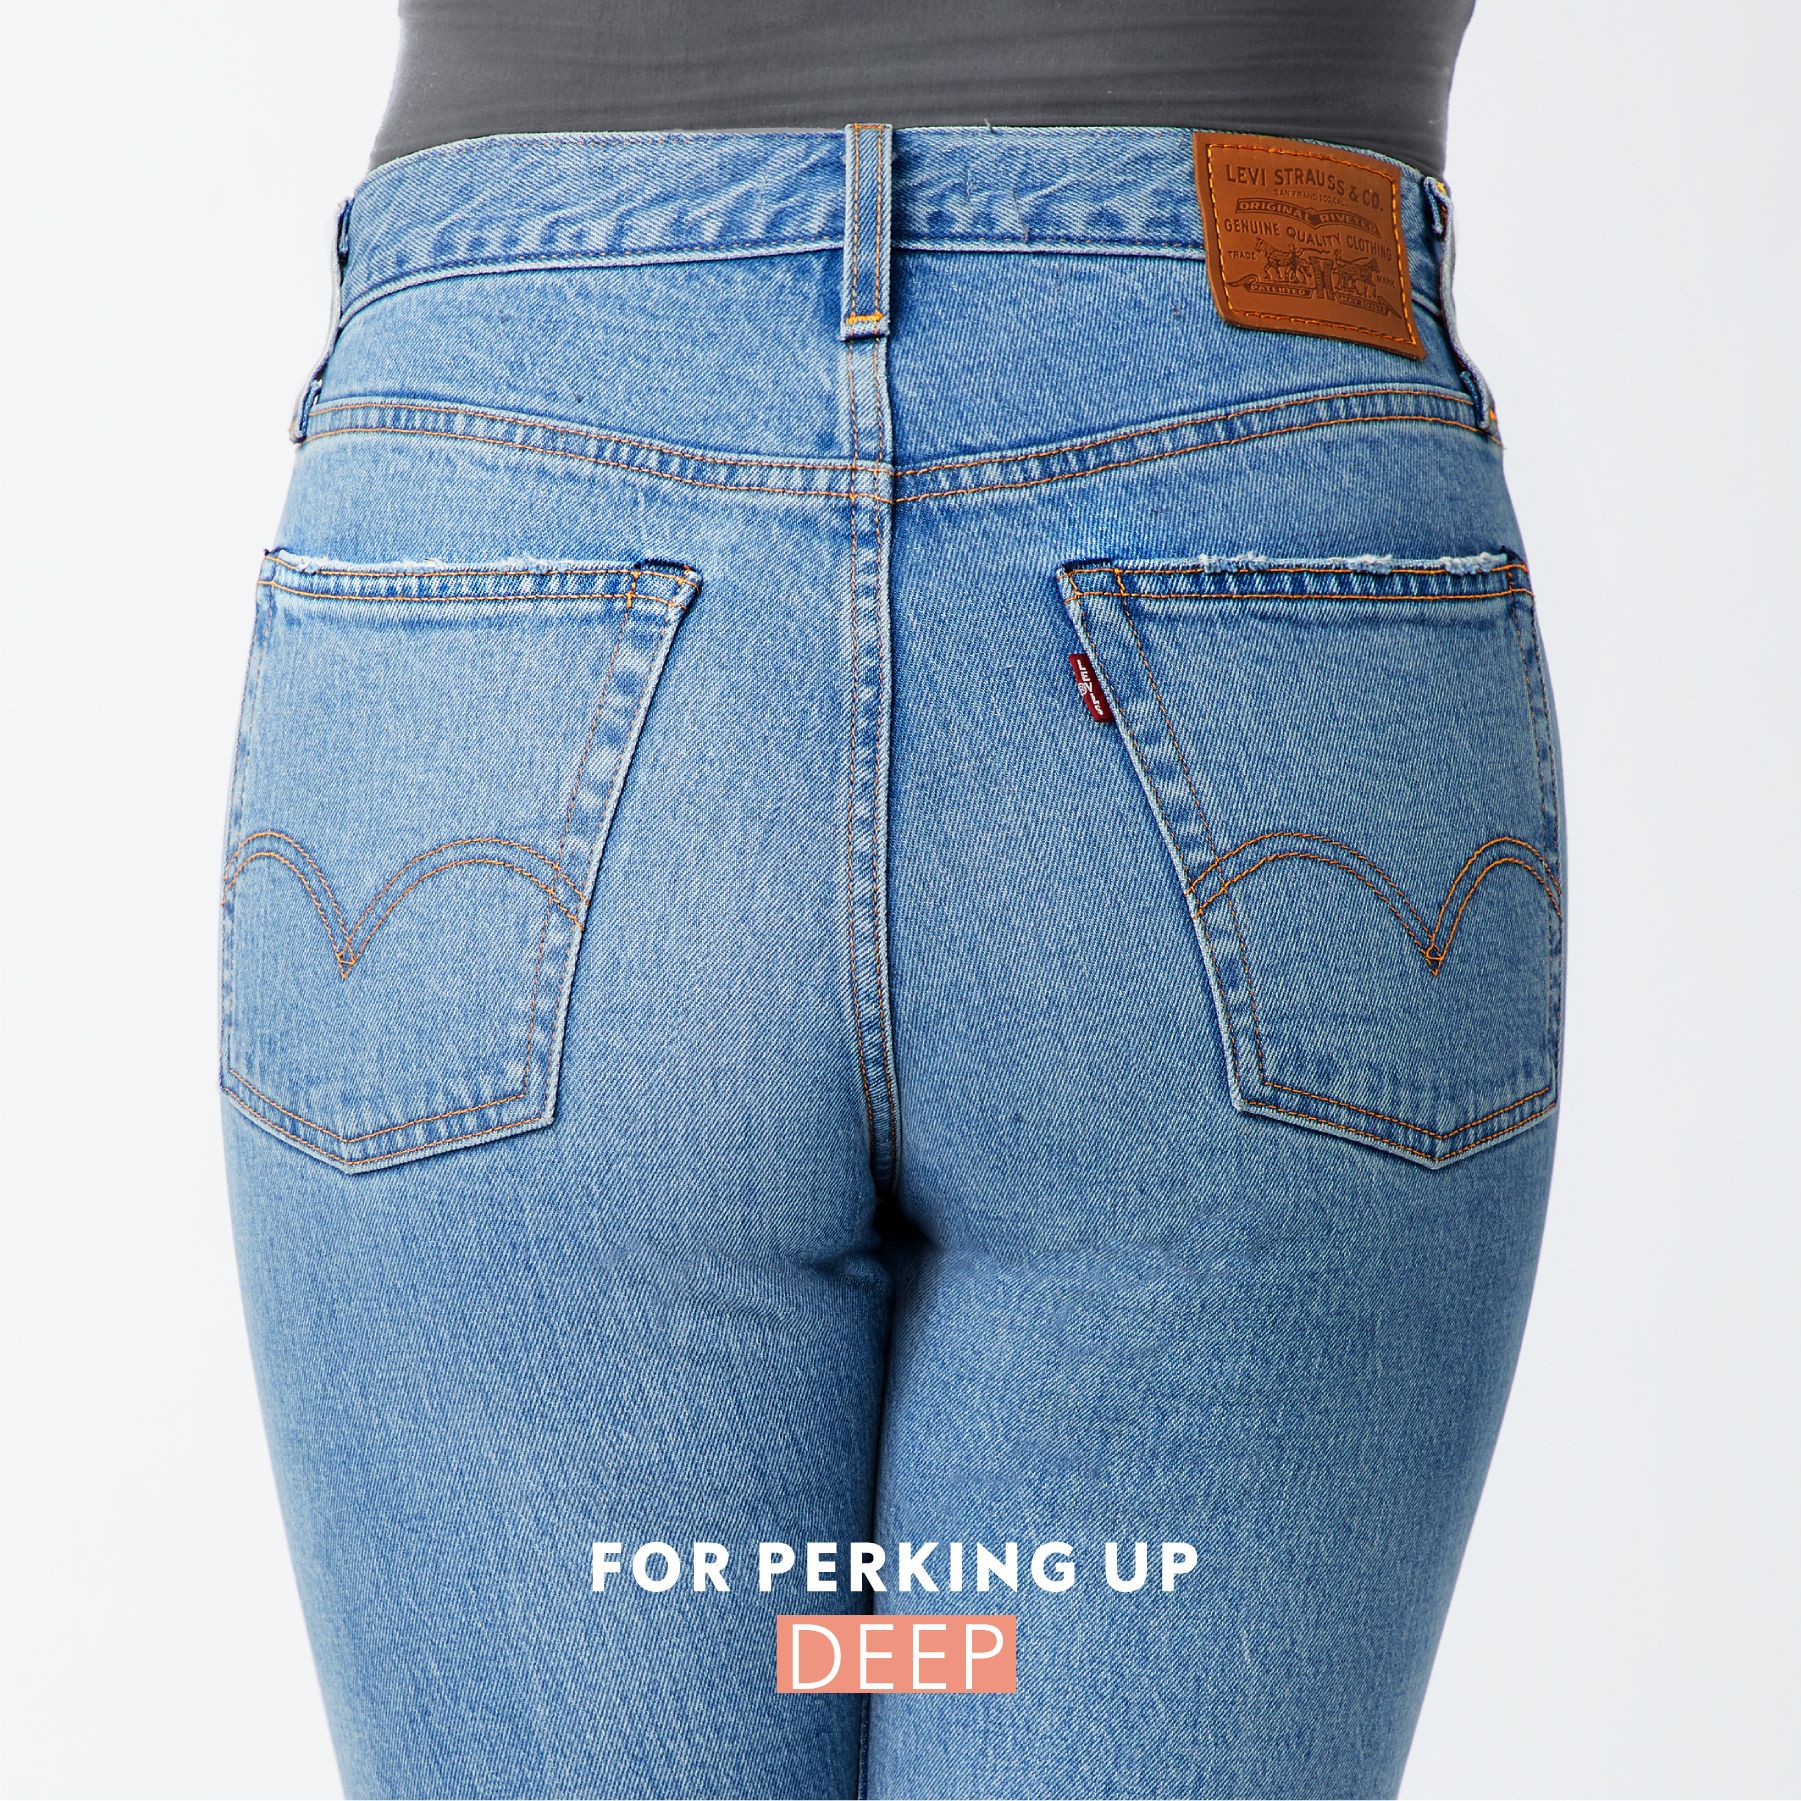 jeans to make your butt look good